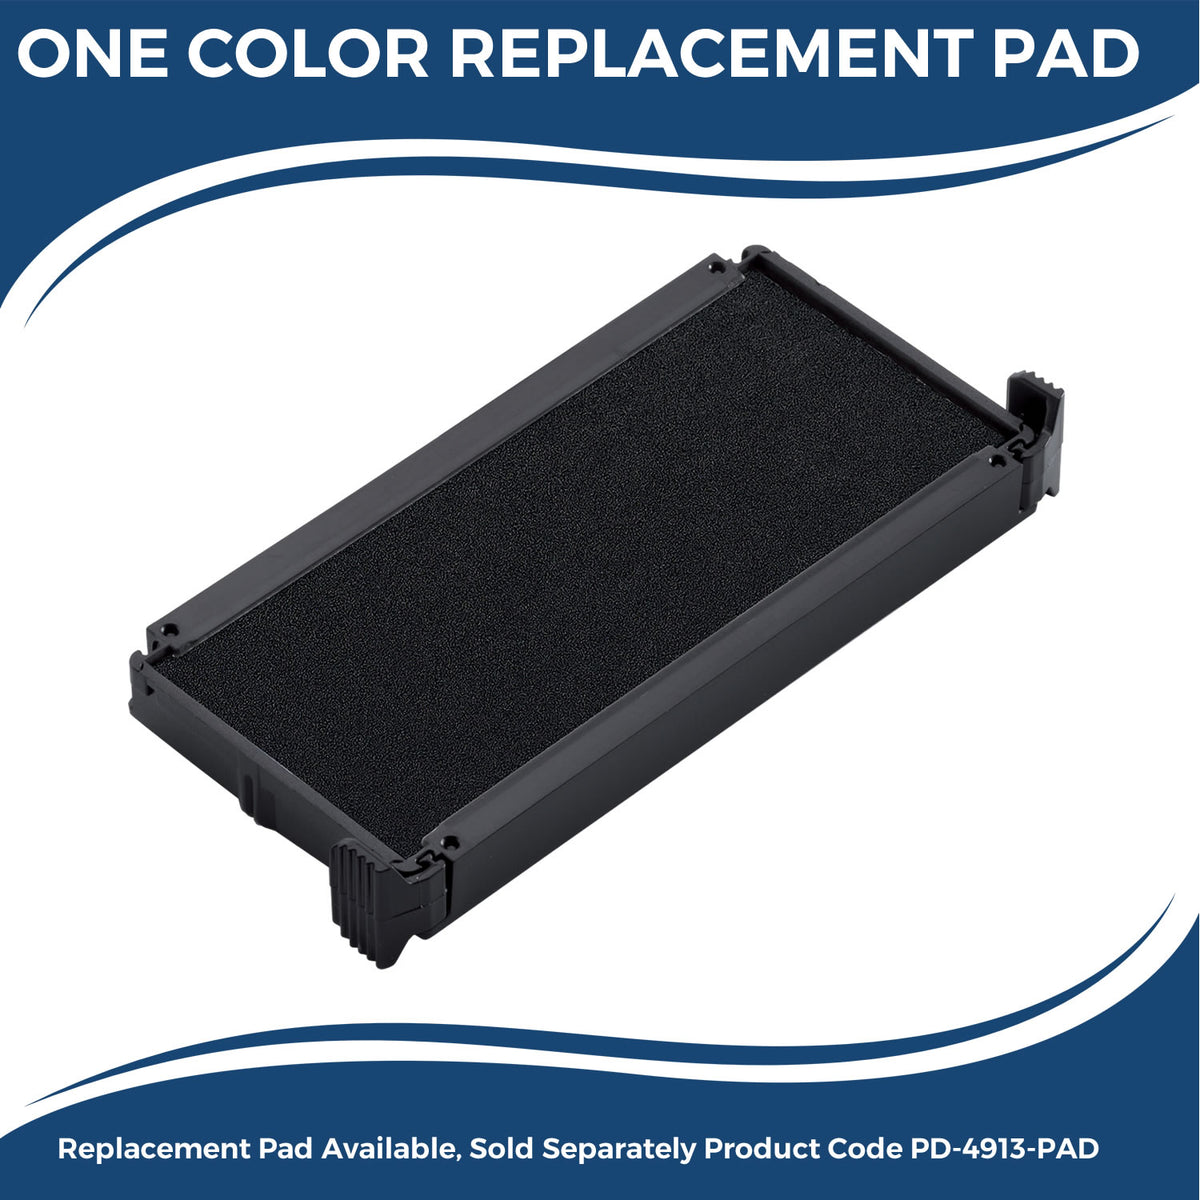 Large Self-Inking E-Mail Stamp 4848S Large Replacment Pad